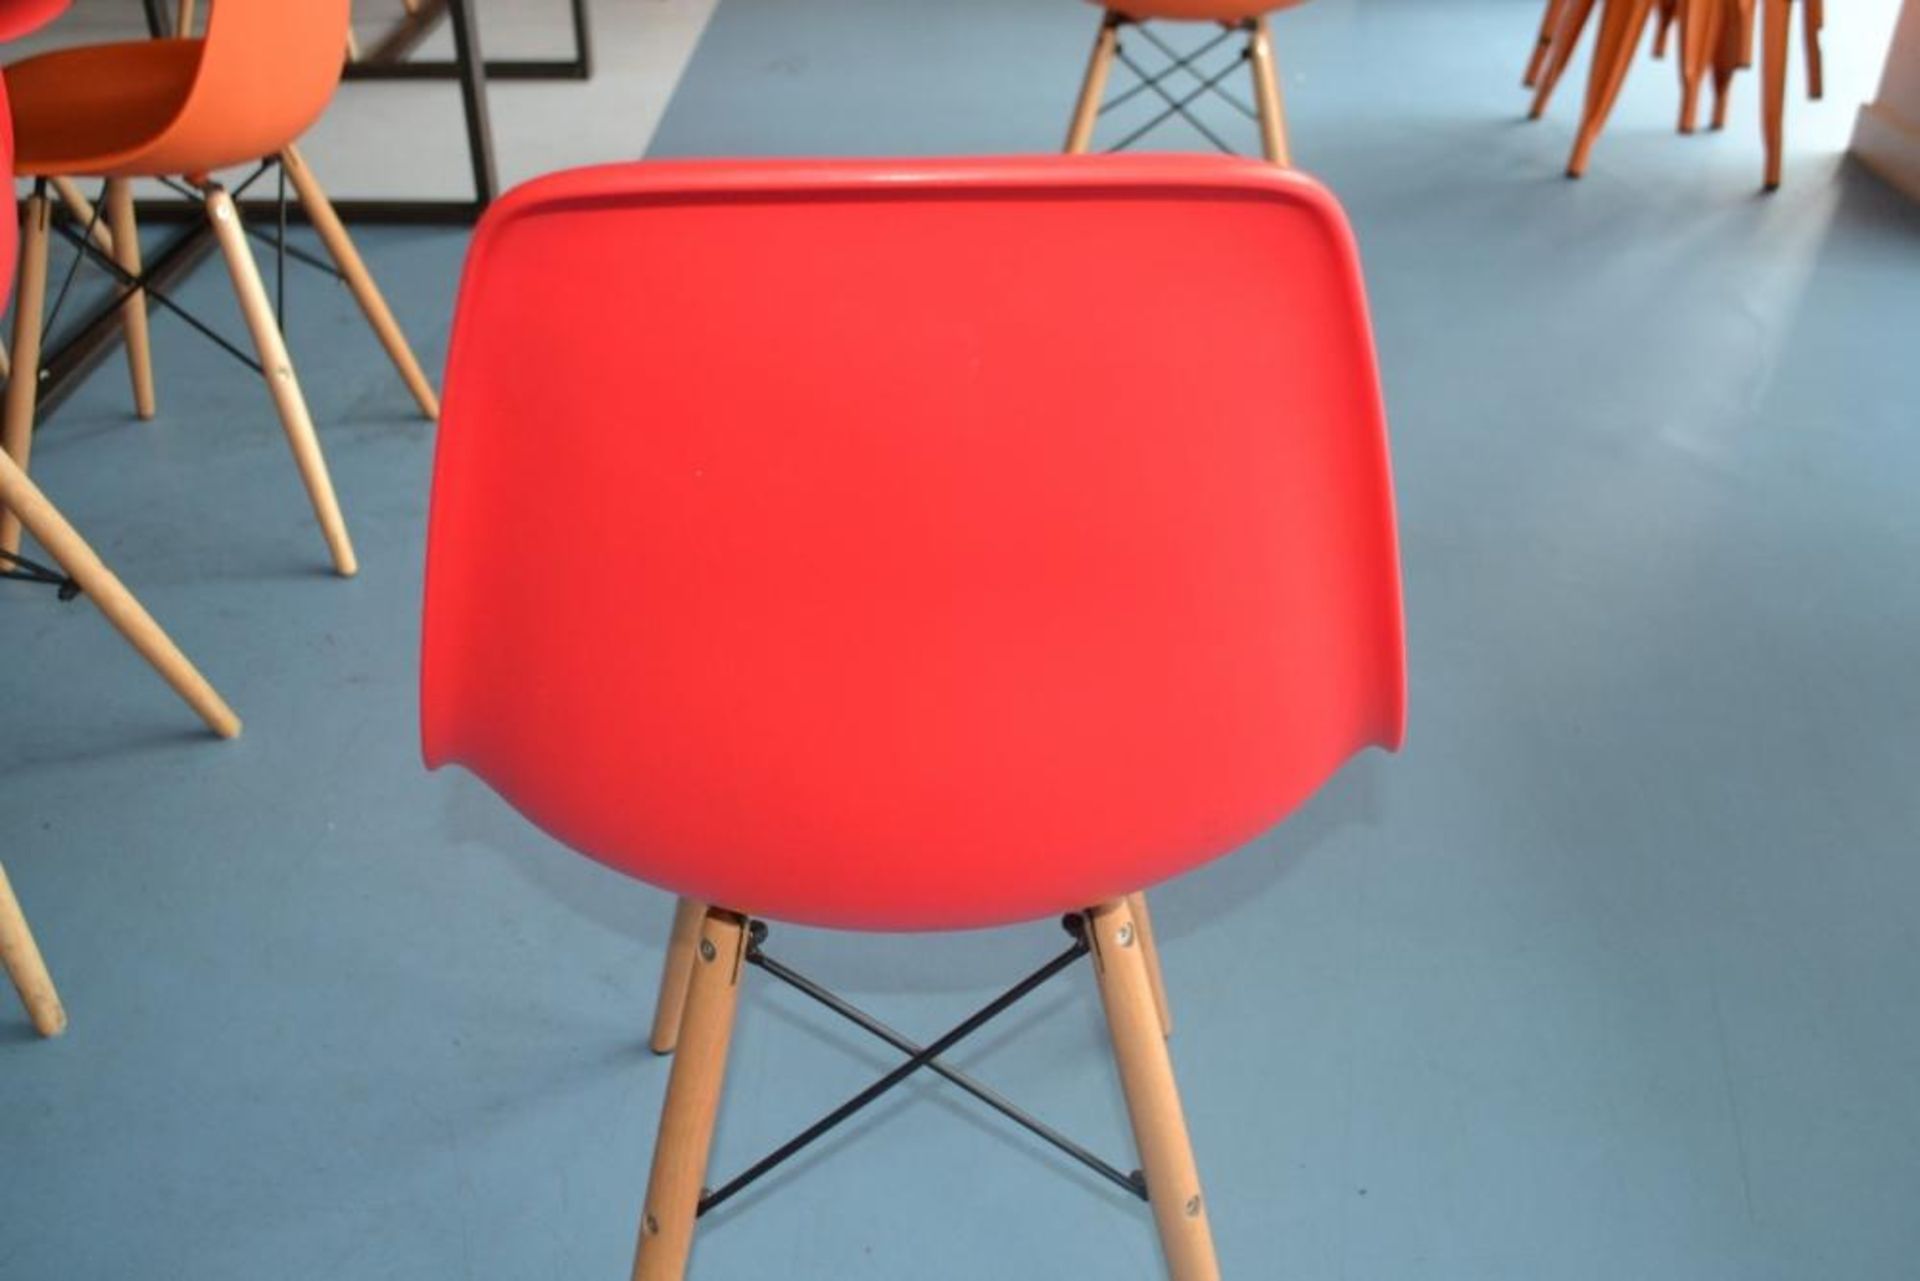 12 x Children's Red and Orange Charles and Ray Eames Style Shell Chairs - CL425 - Location: Altrinch - Image 8 of 9